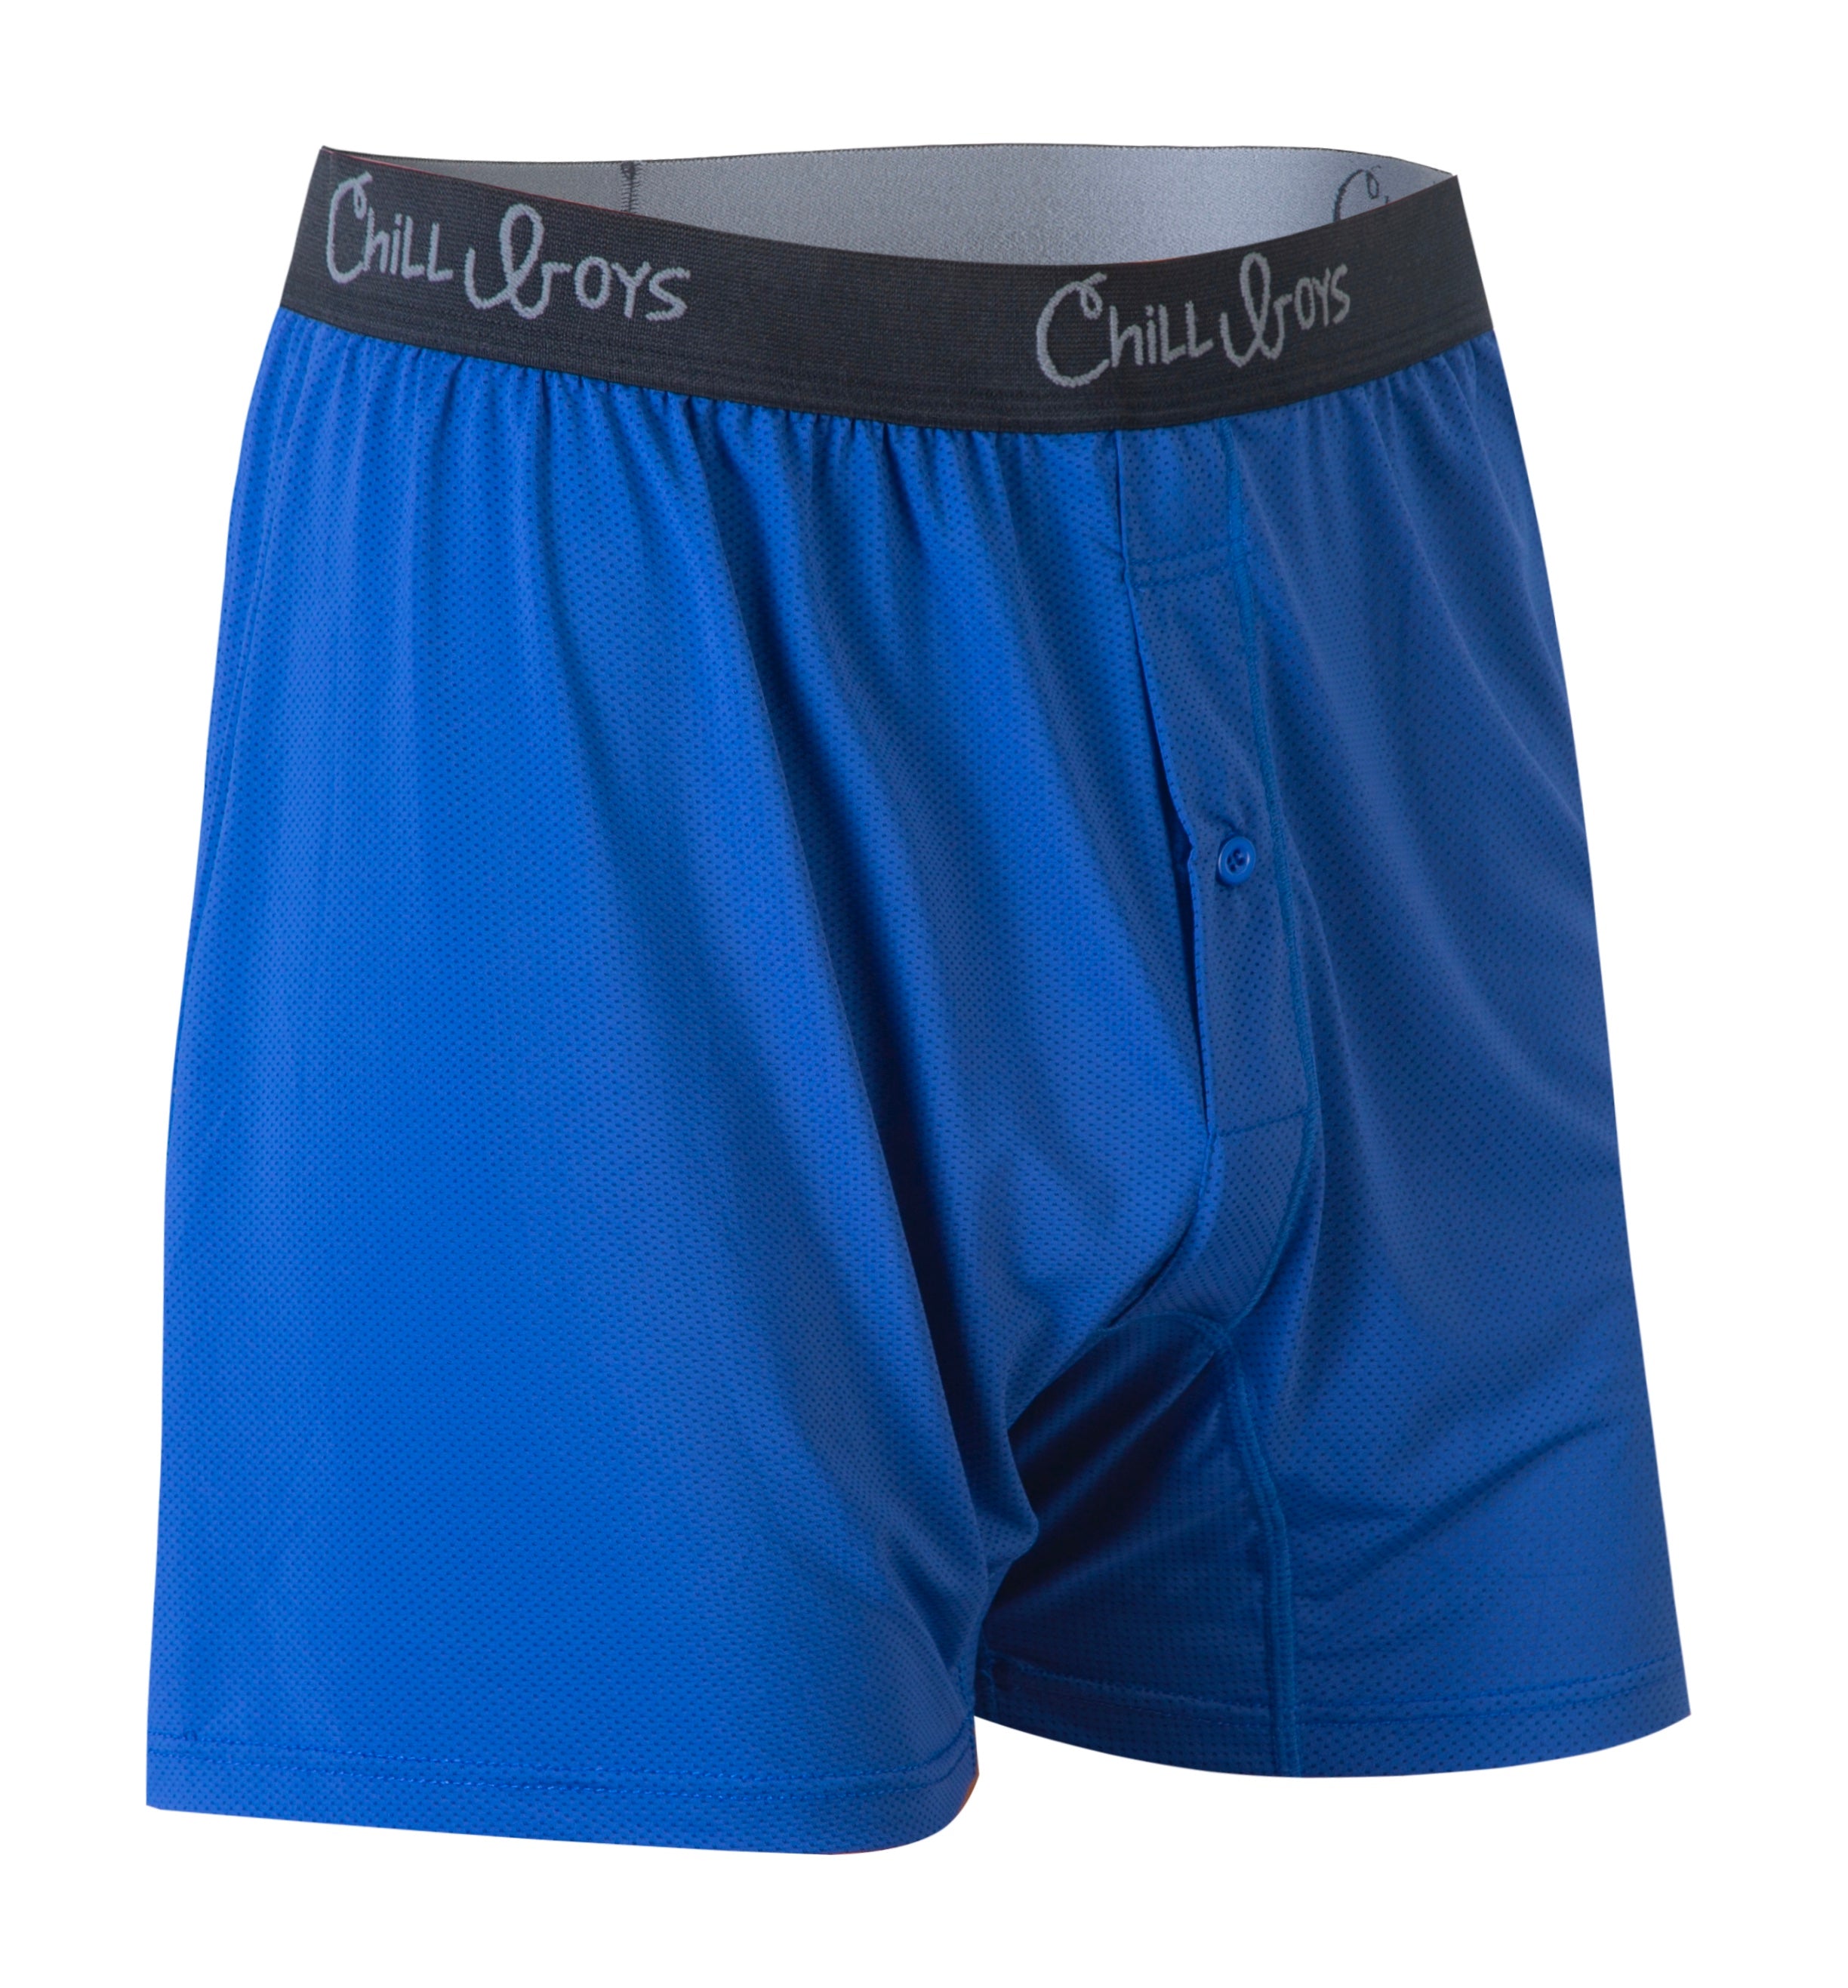 Buy Sport Stretch Quick Dry Moisture Wicking Boxer for men's